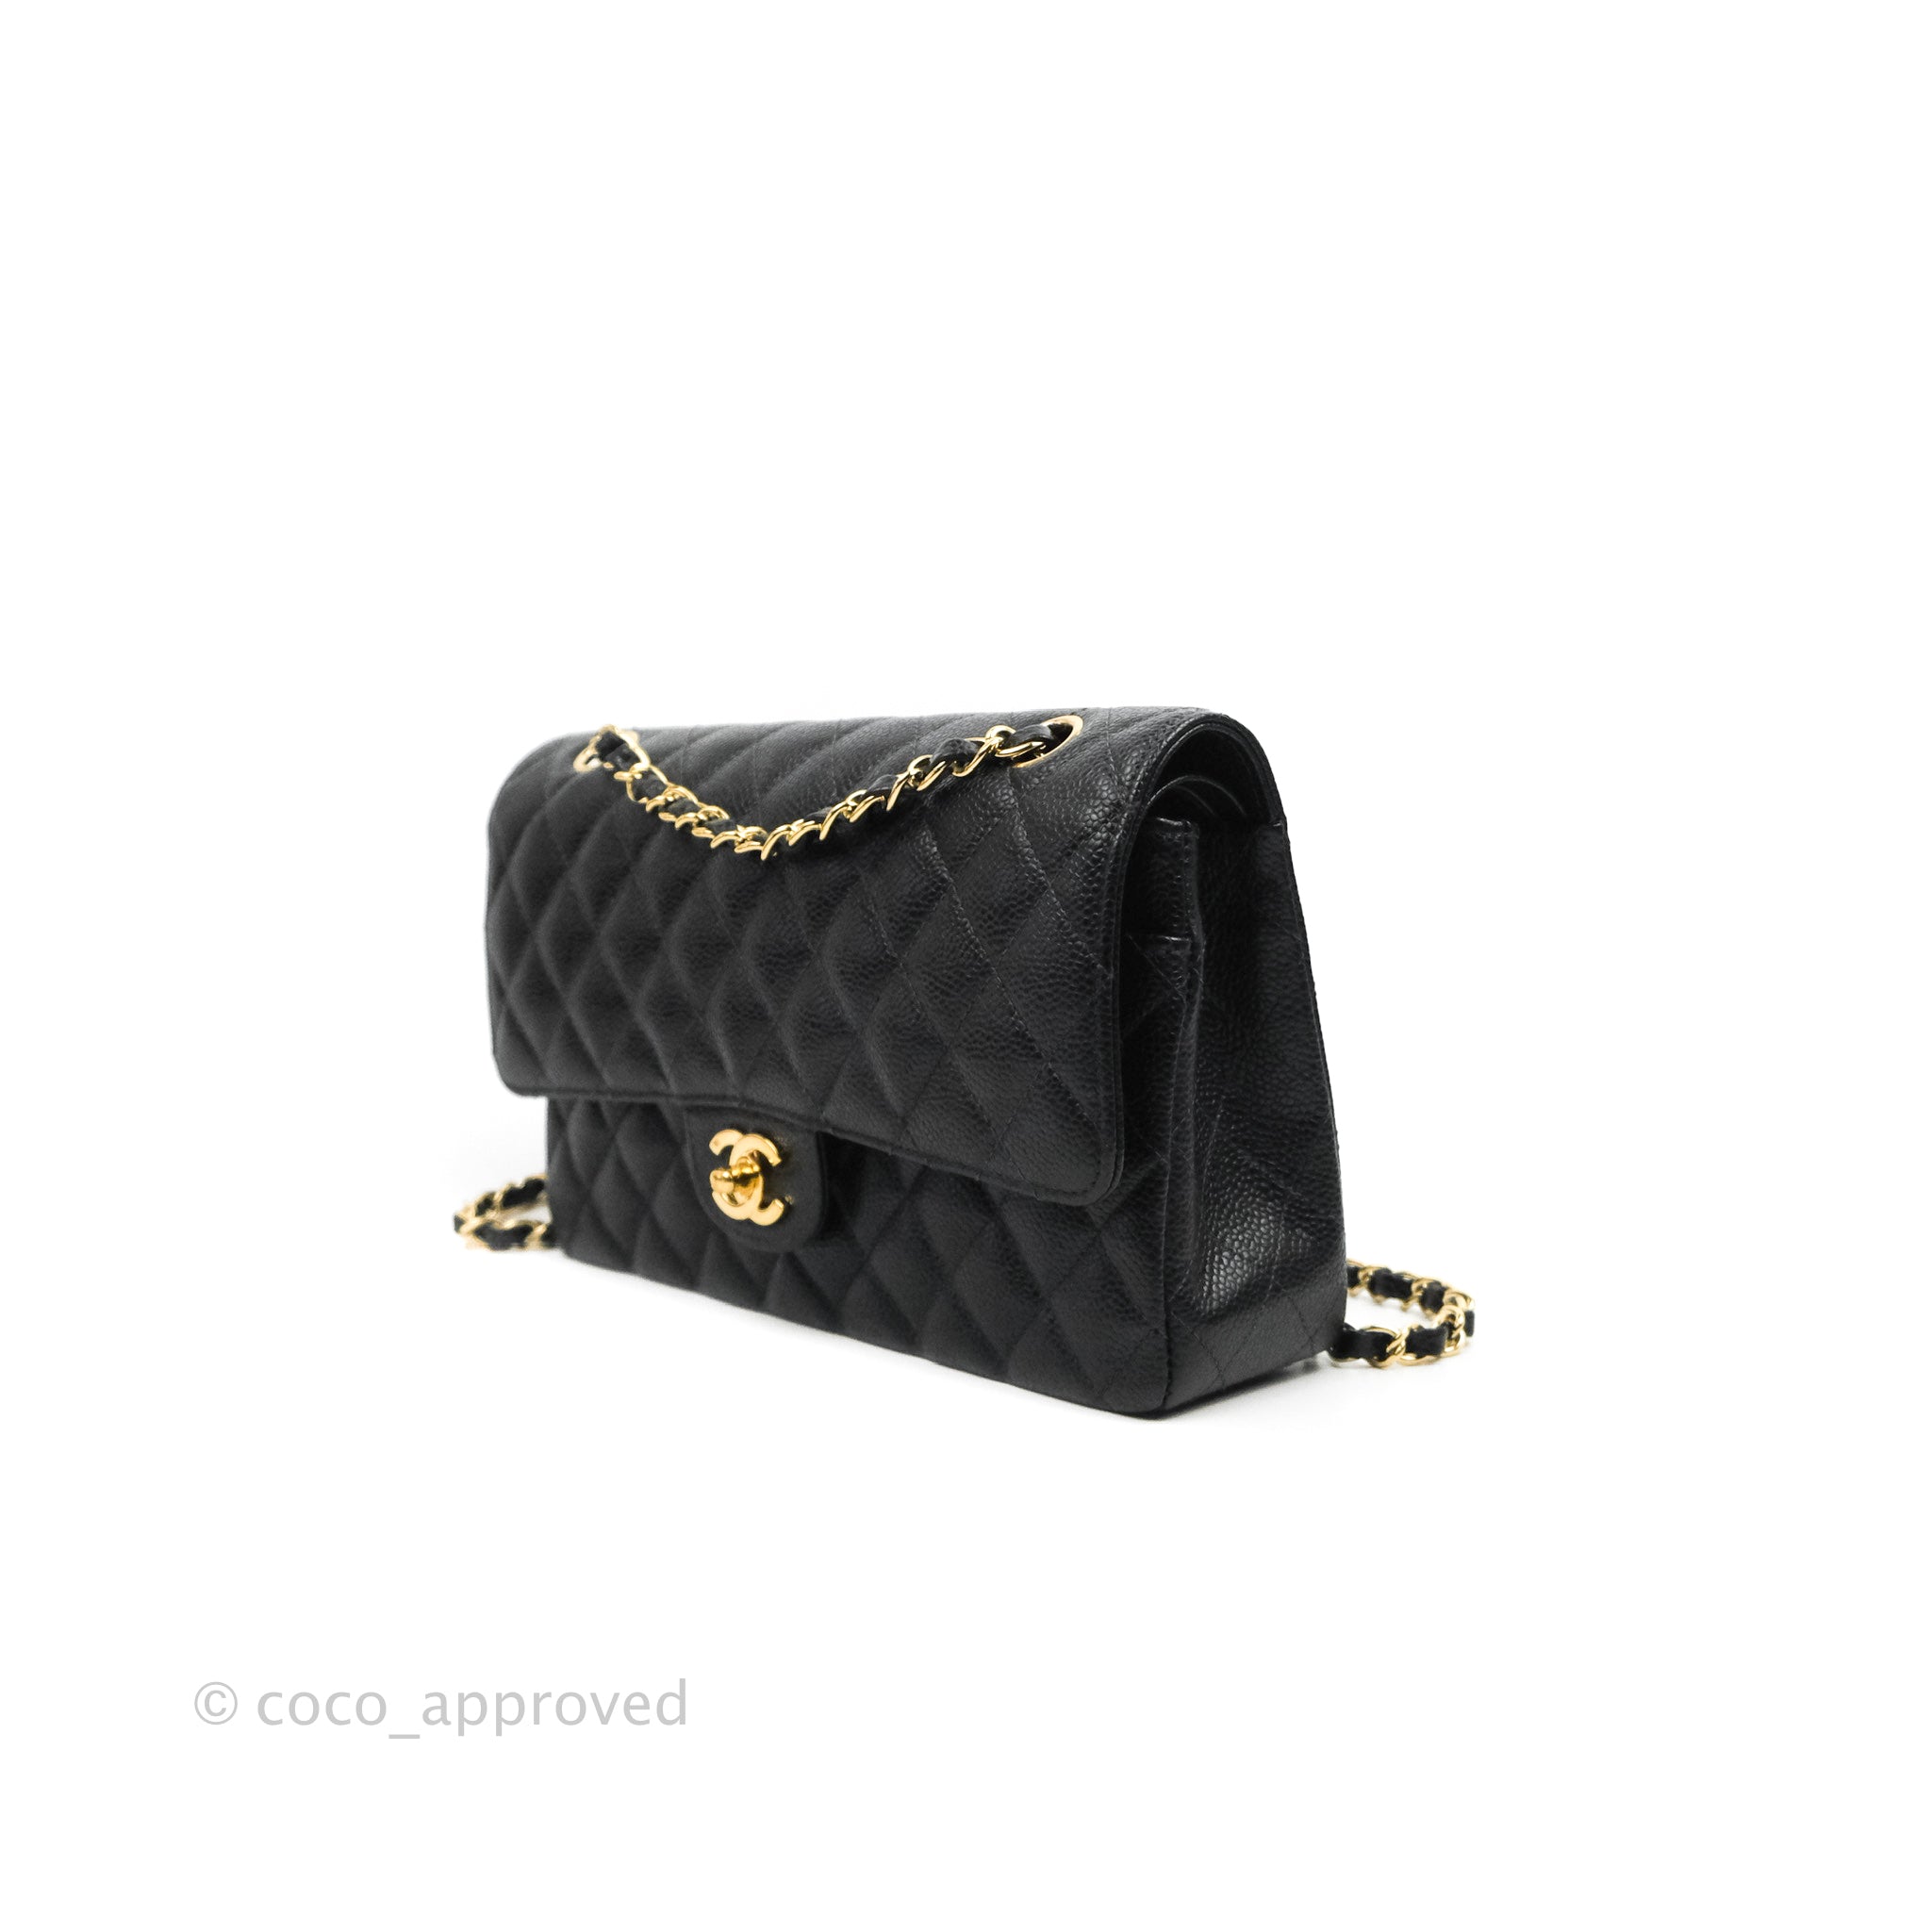 FULL SET! Chanel Classic Vintage Small Flap bag with 24K gold